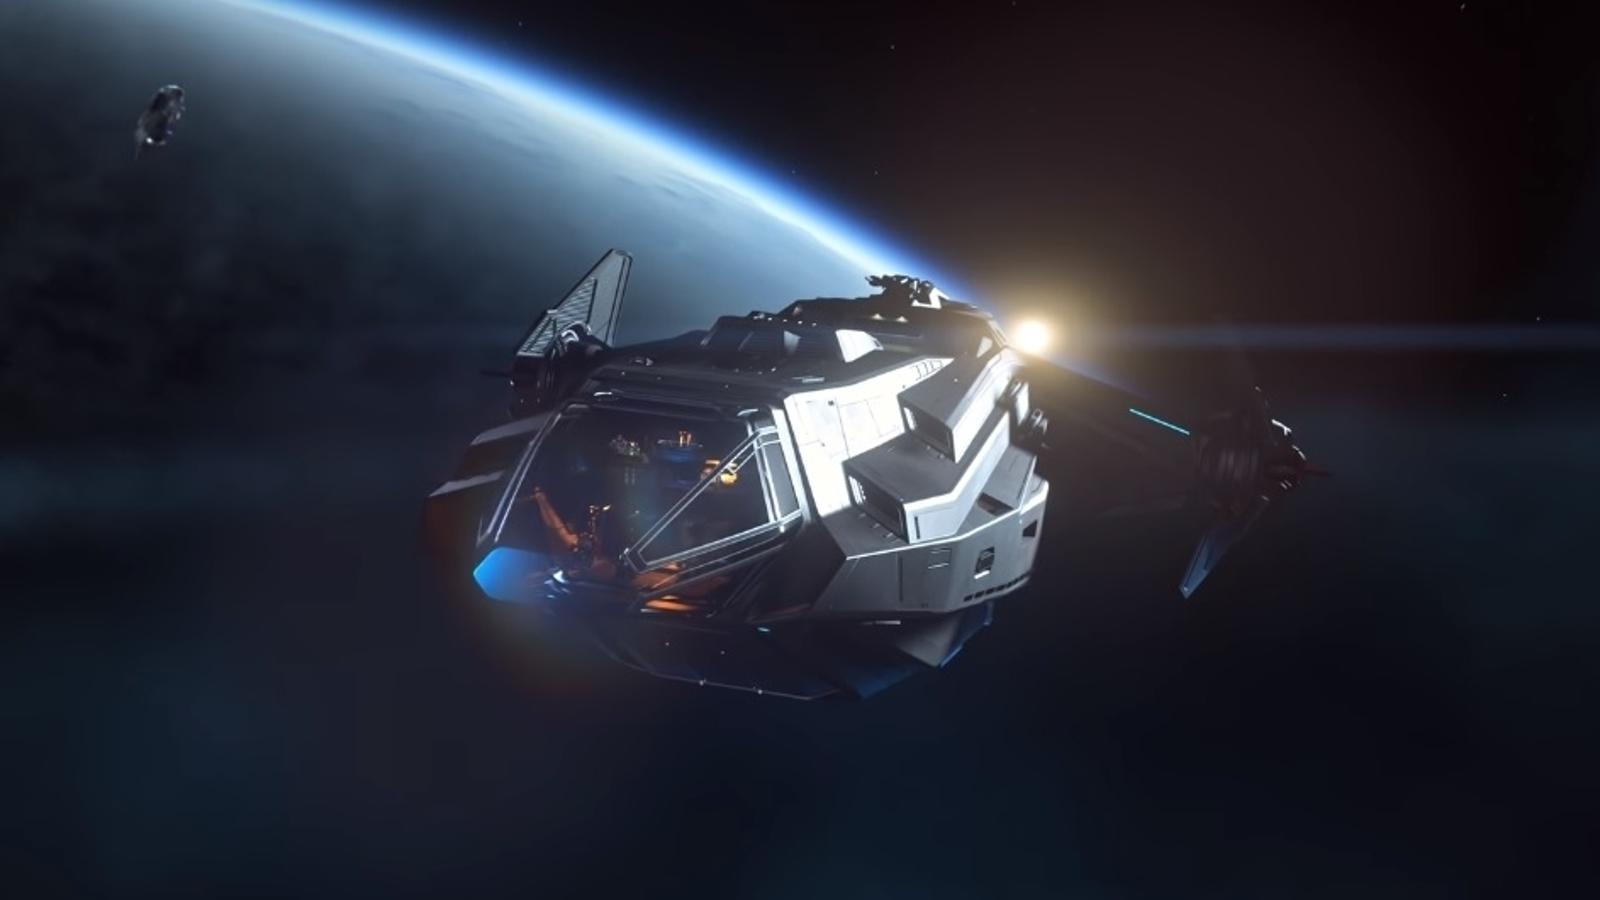 Star Citizen PC 2015 year in review